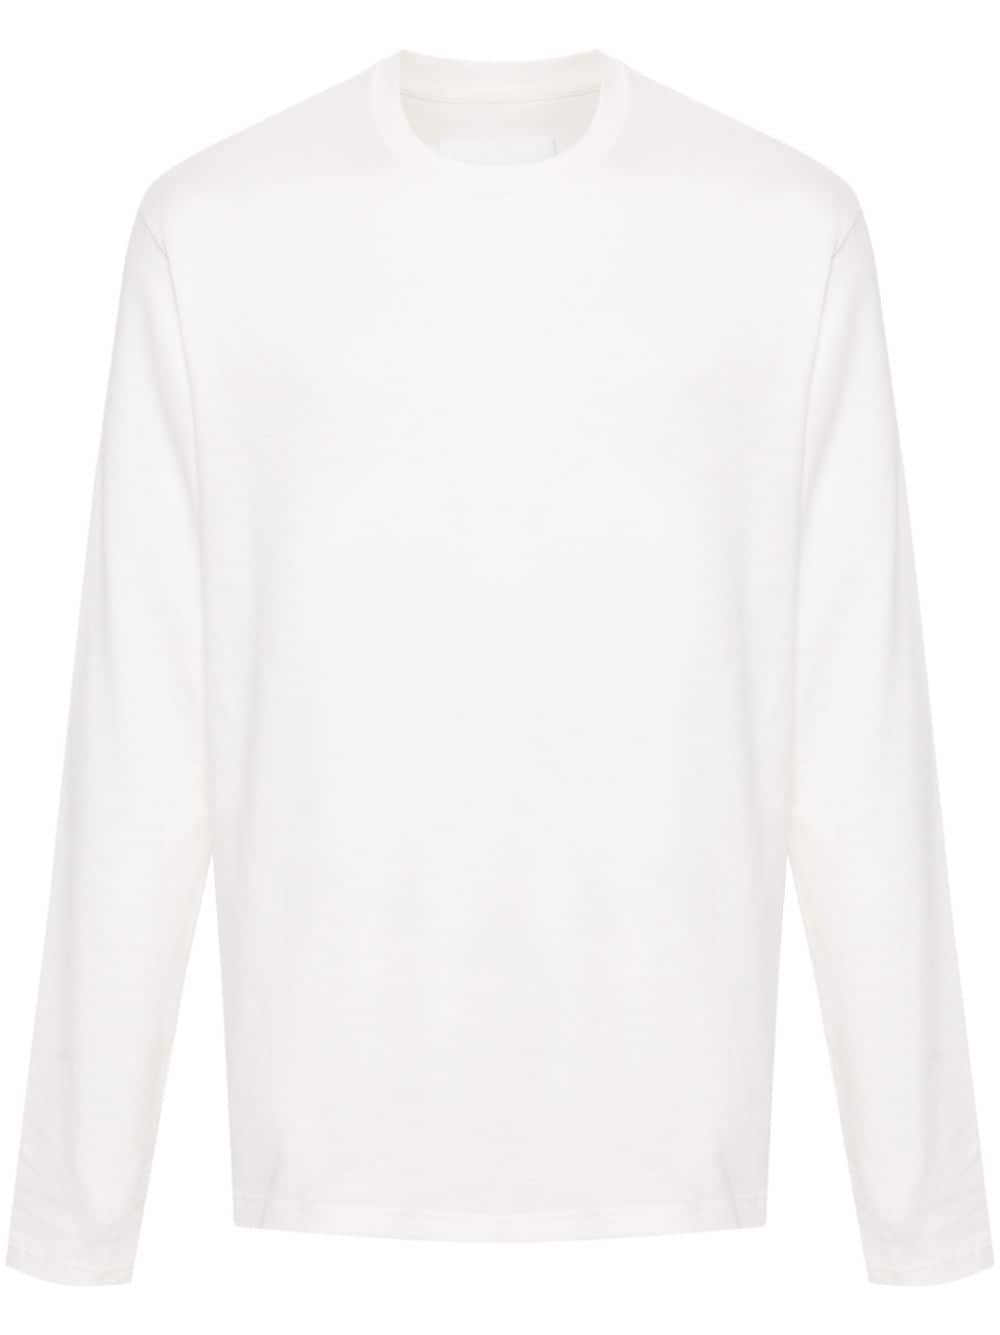 Long-sleeve cotton T-shirt<BR/><BR/><BR/>